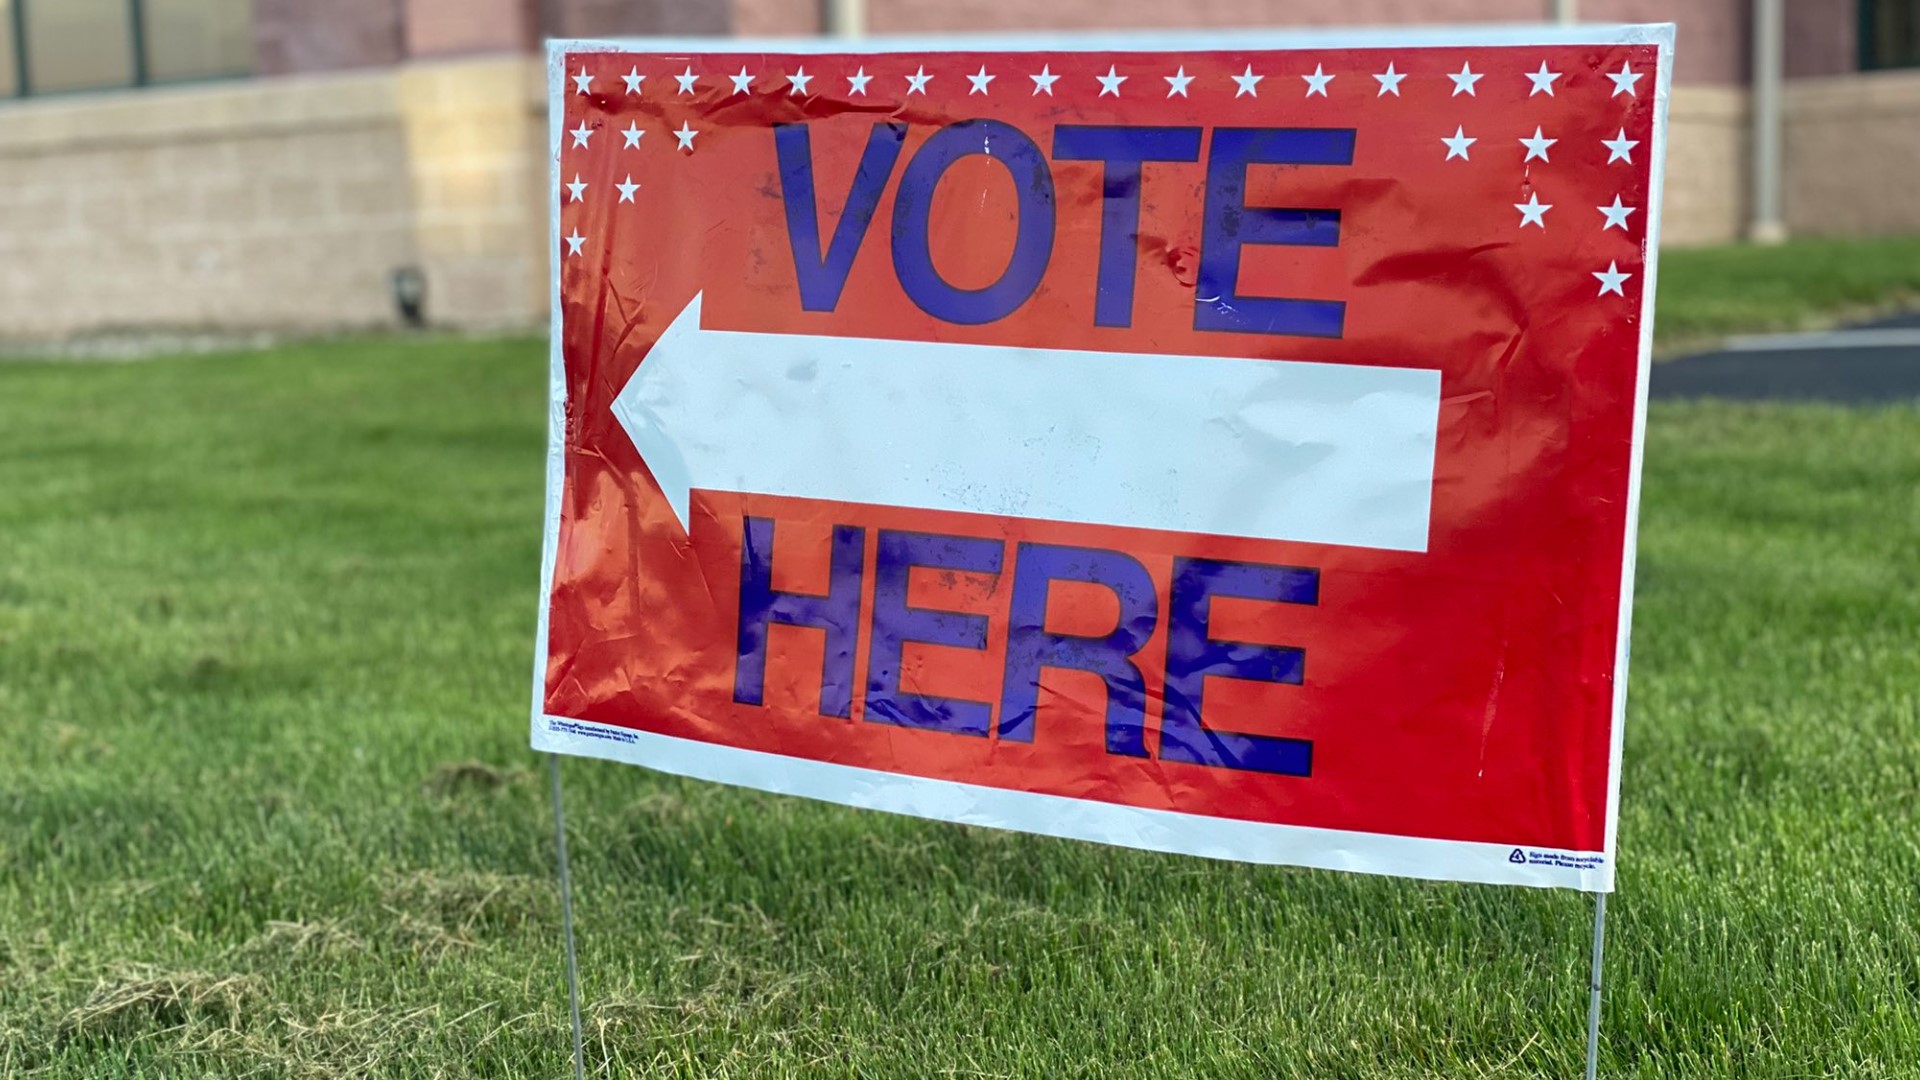 Election day is here! Polls are open from 7:00 a.m. until 8:00 p.m.